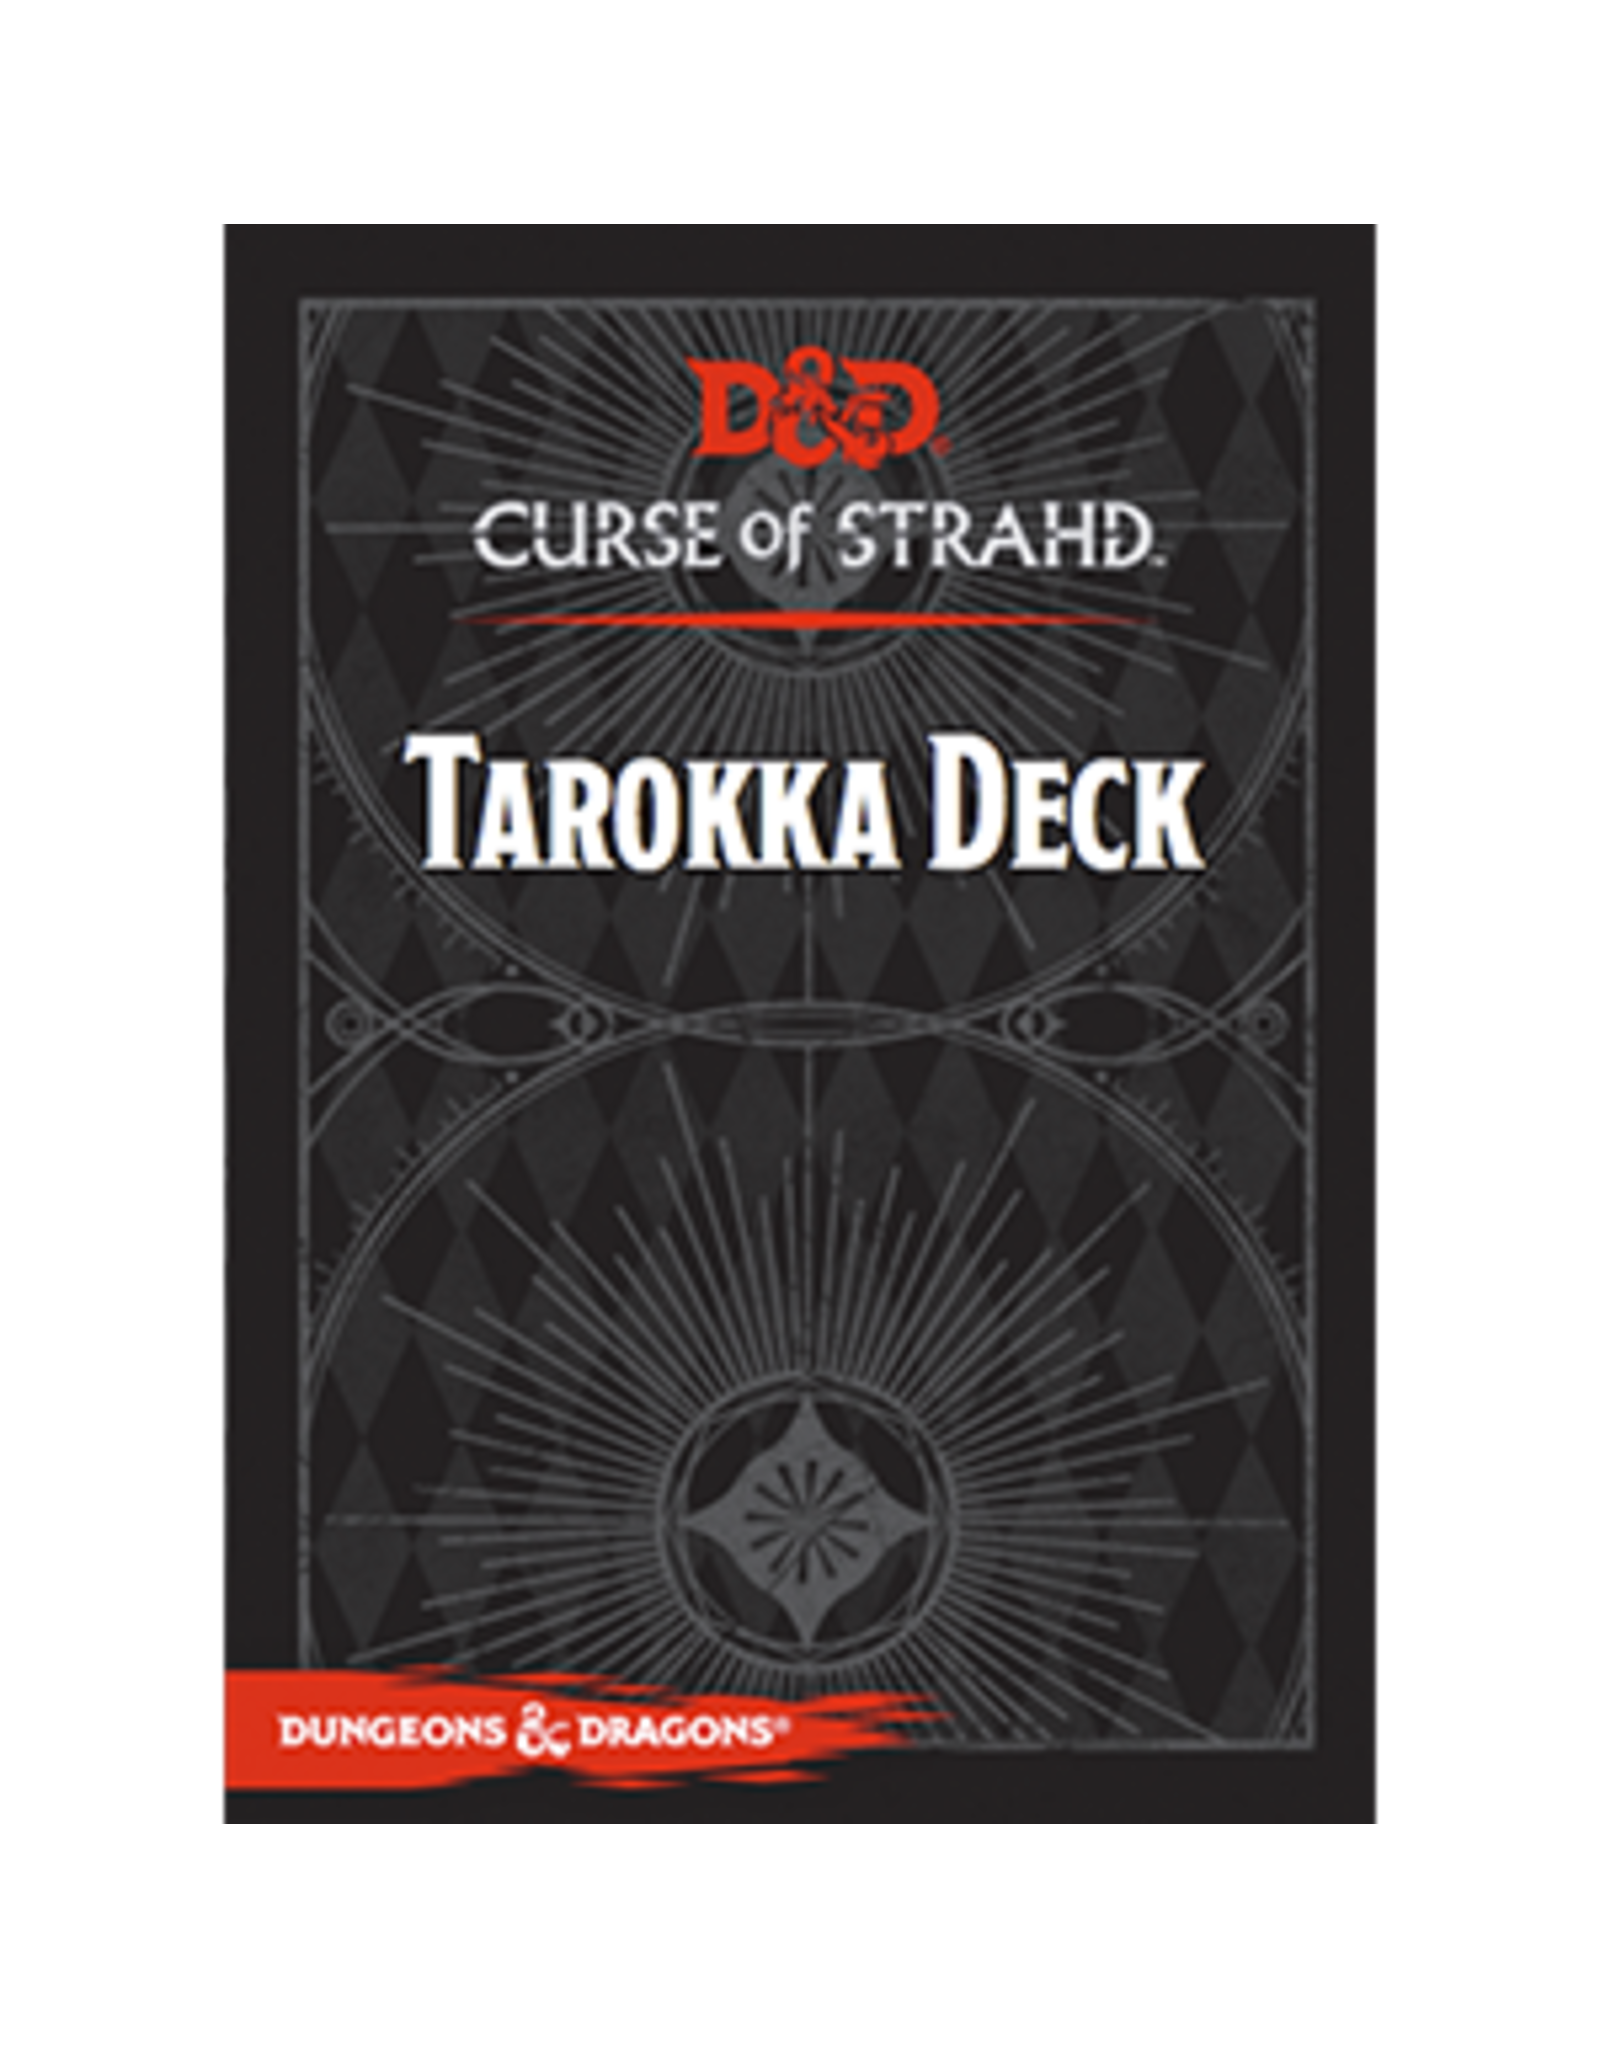 Wizards of the Coast Dungeons and Dragons RPG: Curse of Strahd - Tarokka Deck (54 cards)